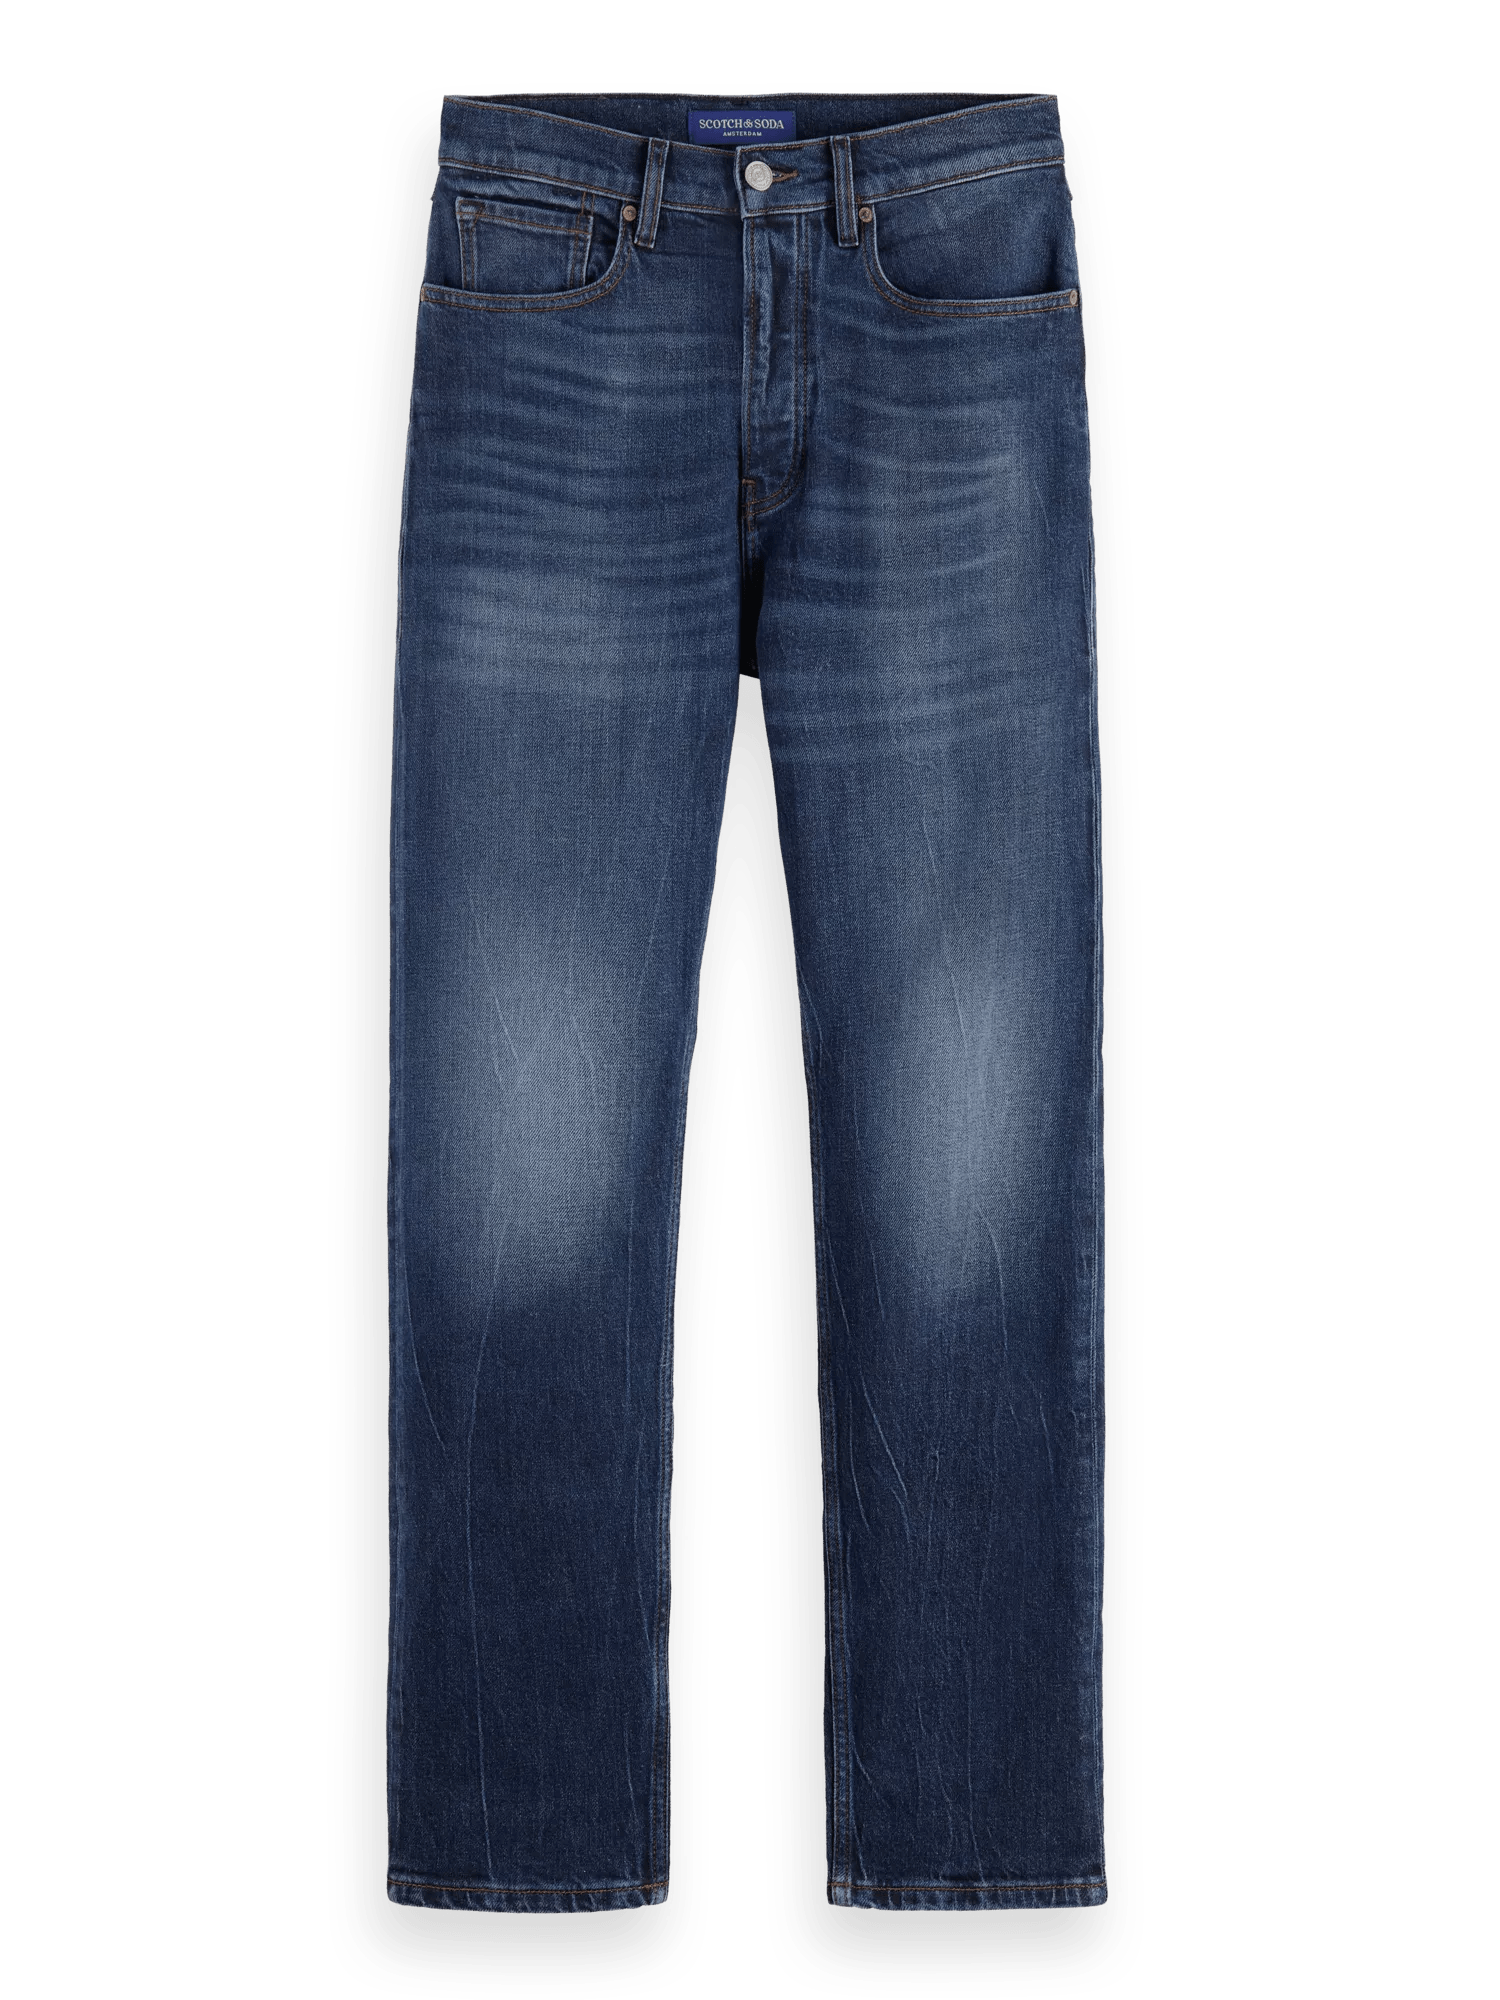 Scotch & Soda - The Drop Tapered Jean - Remixed